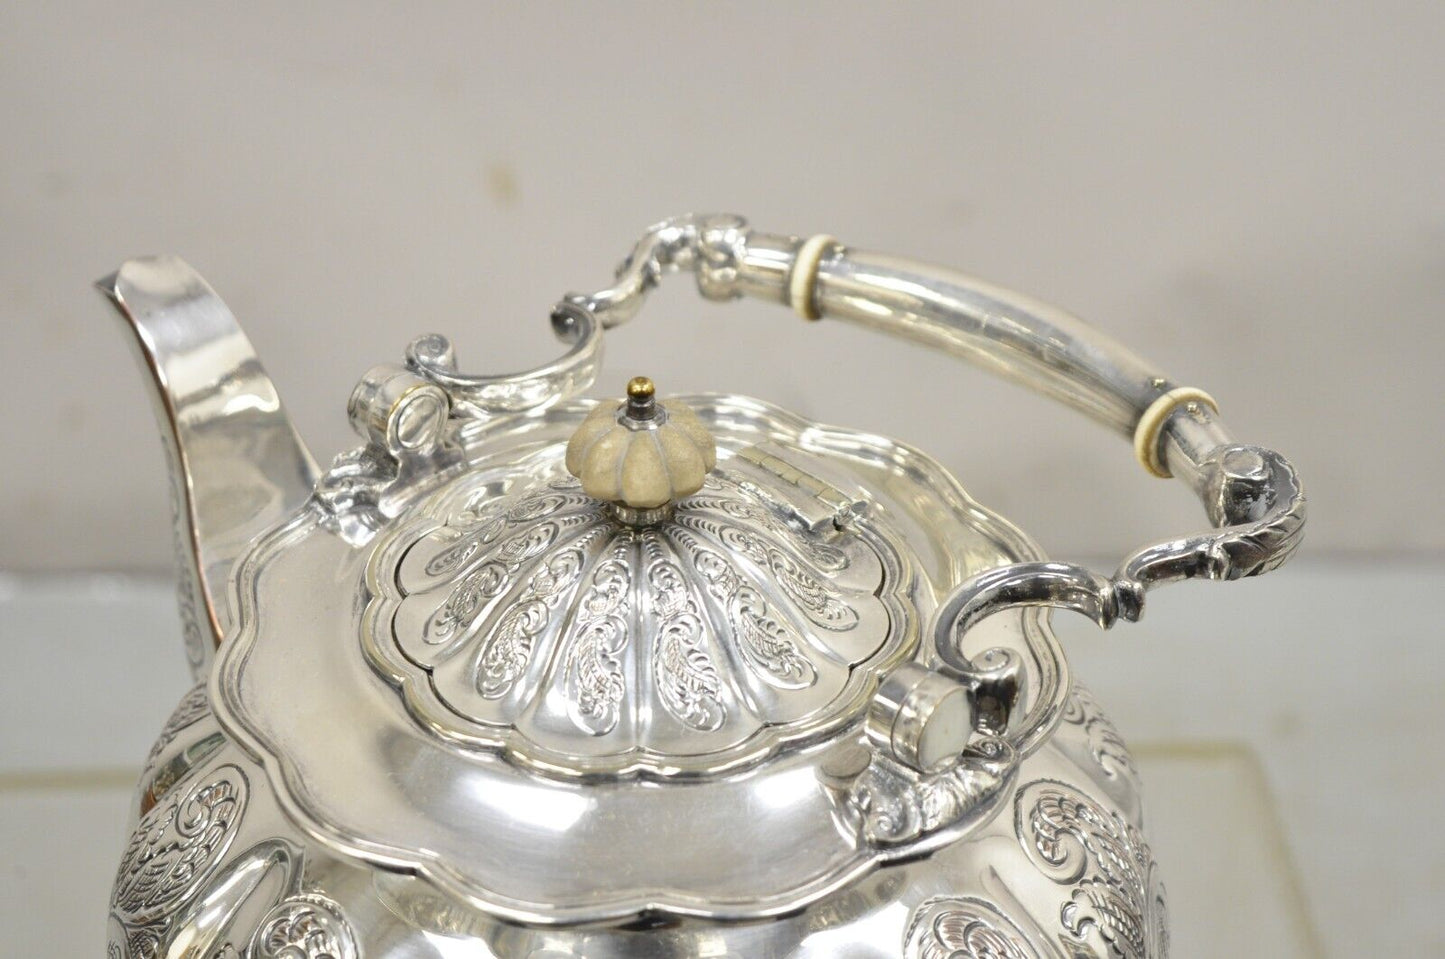 Antique English Victorian PS Co. Silver Plated Tipping Tea Pot on Warming Base